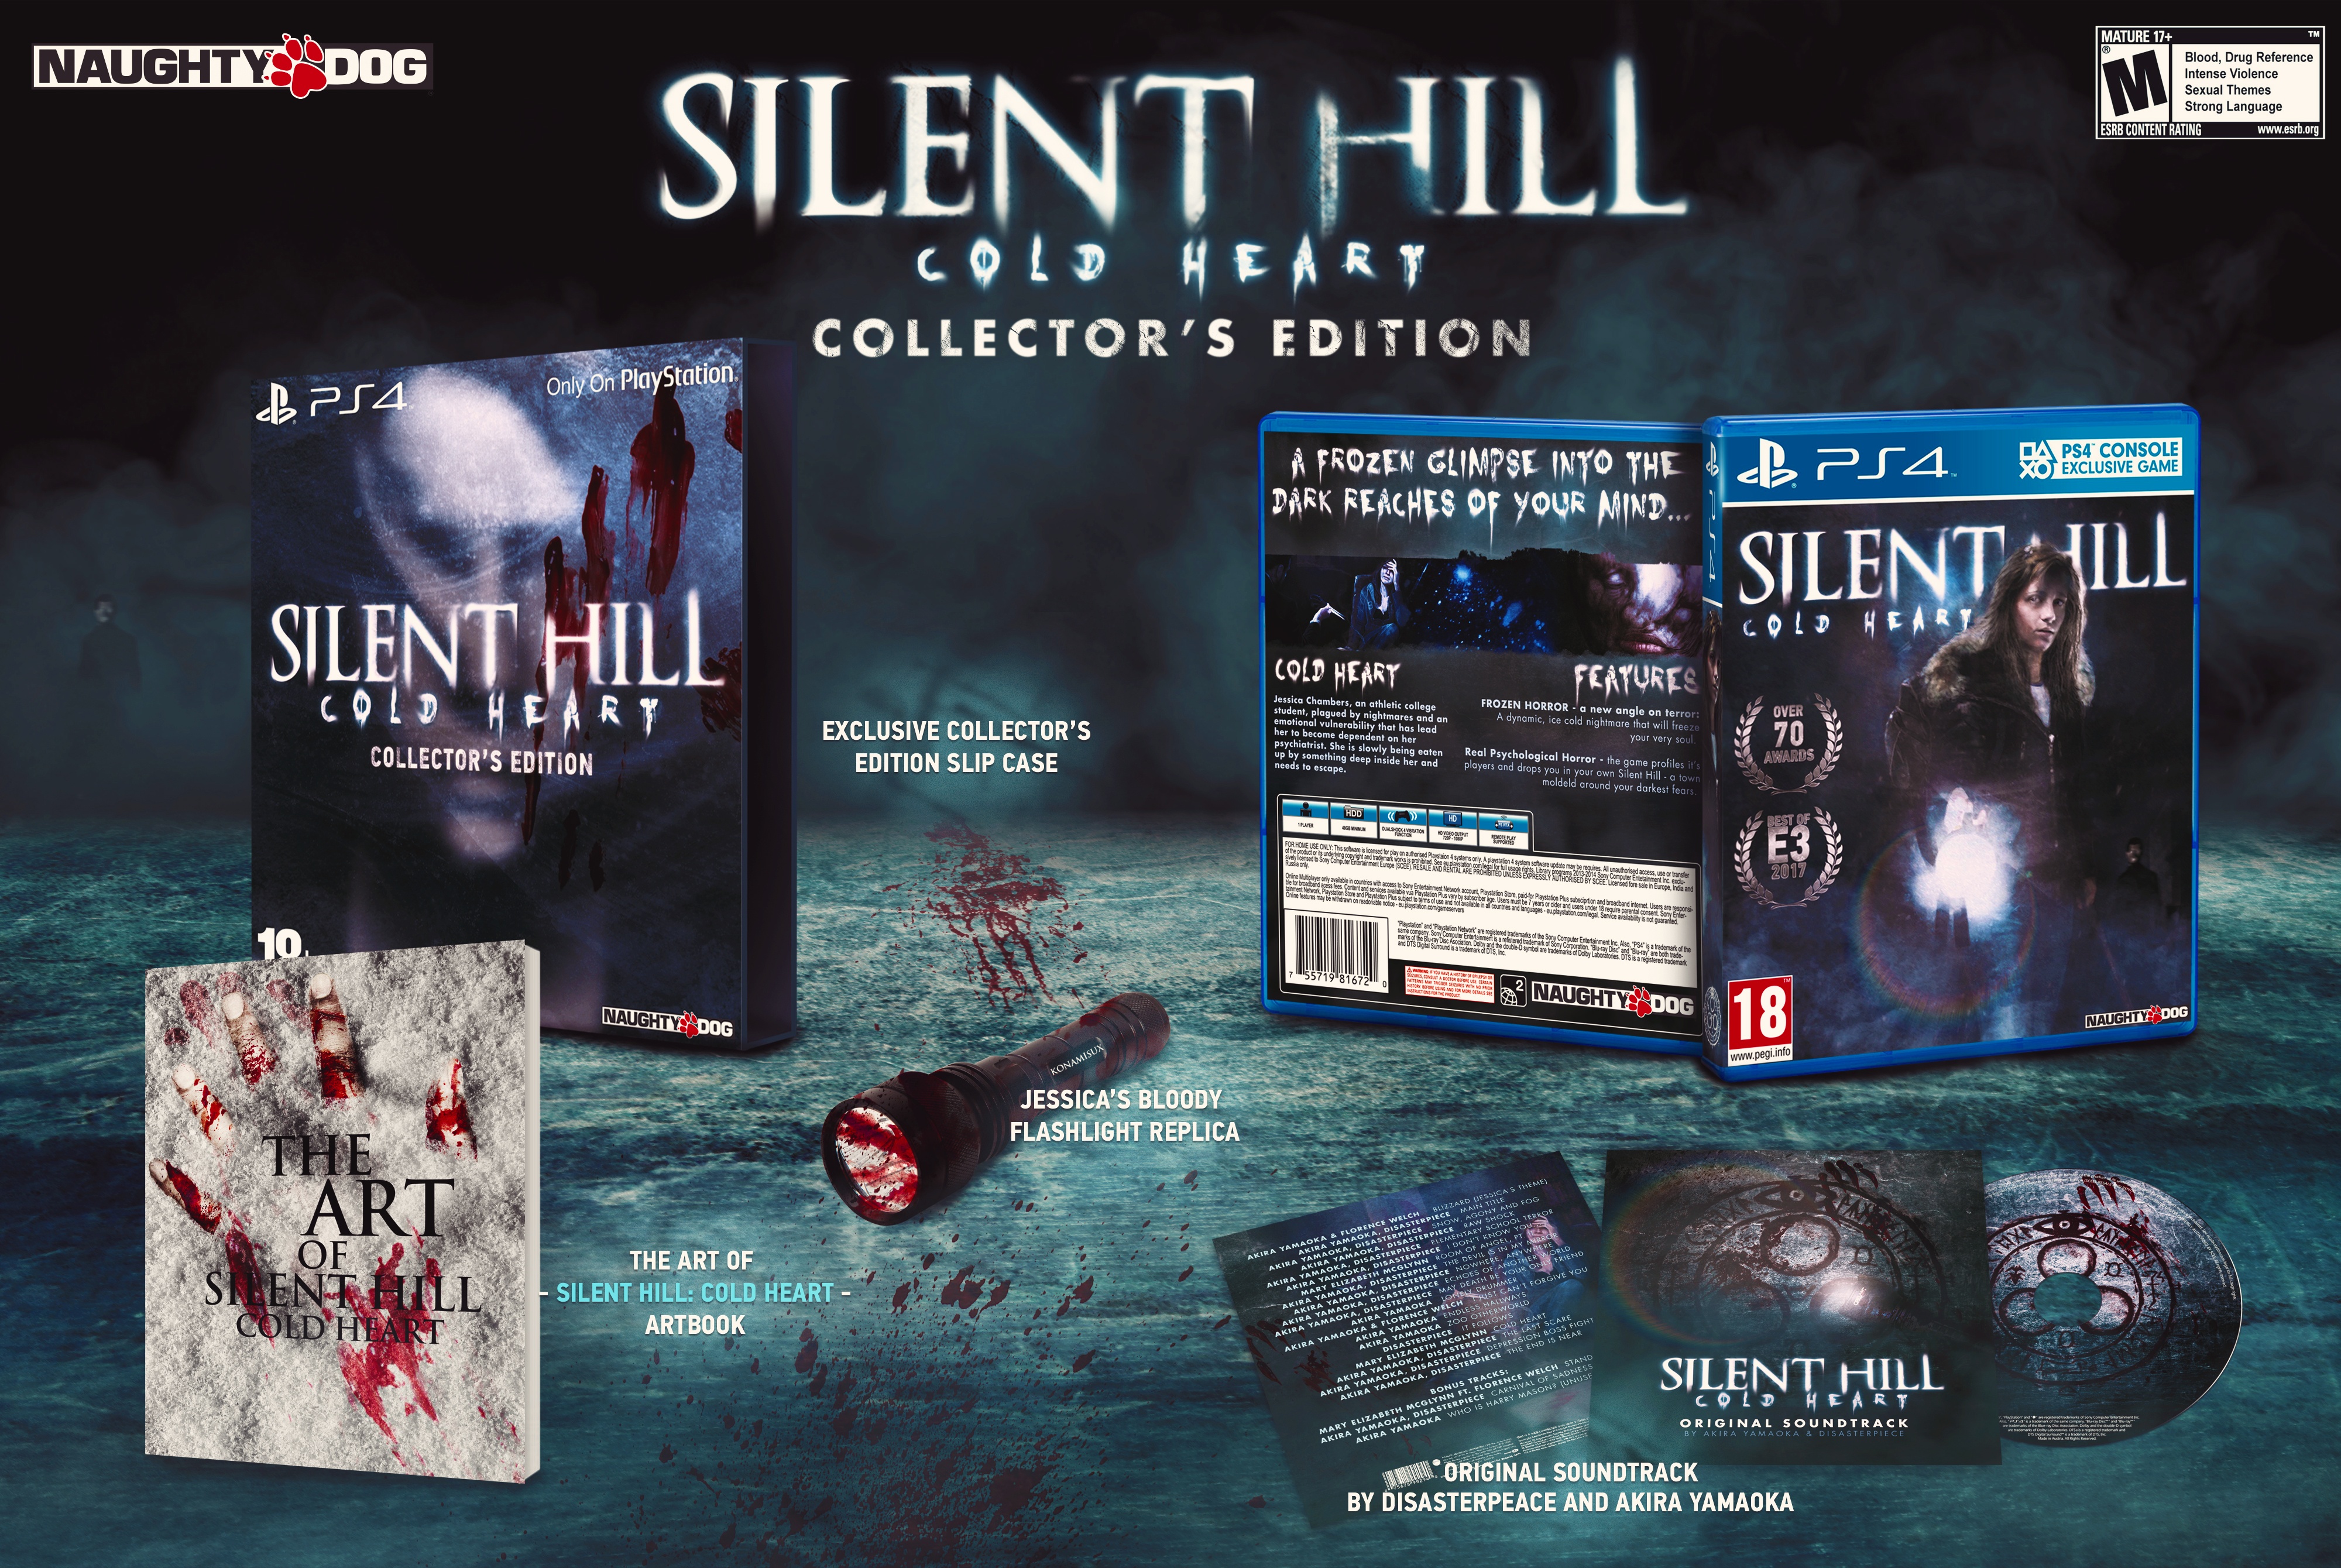 Silent Hill: Cold Heart - Collector's Edition box cover